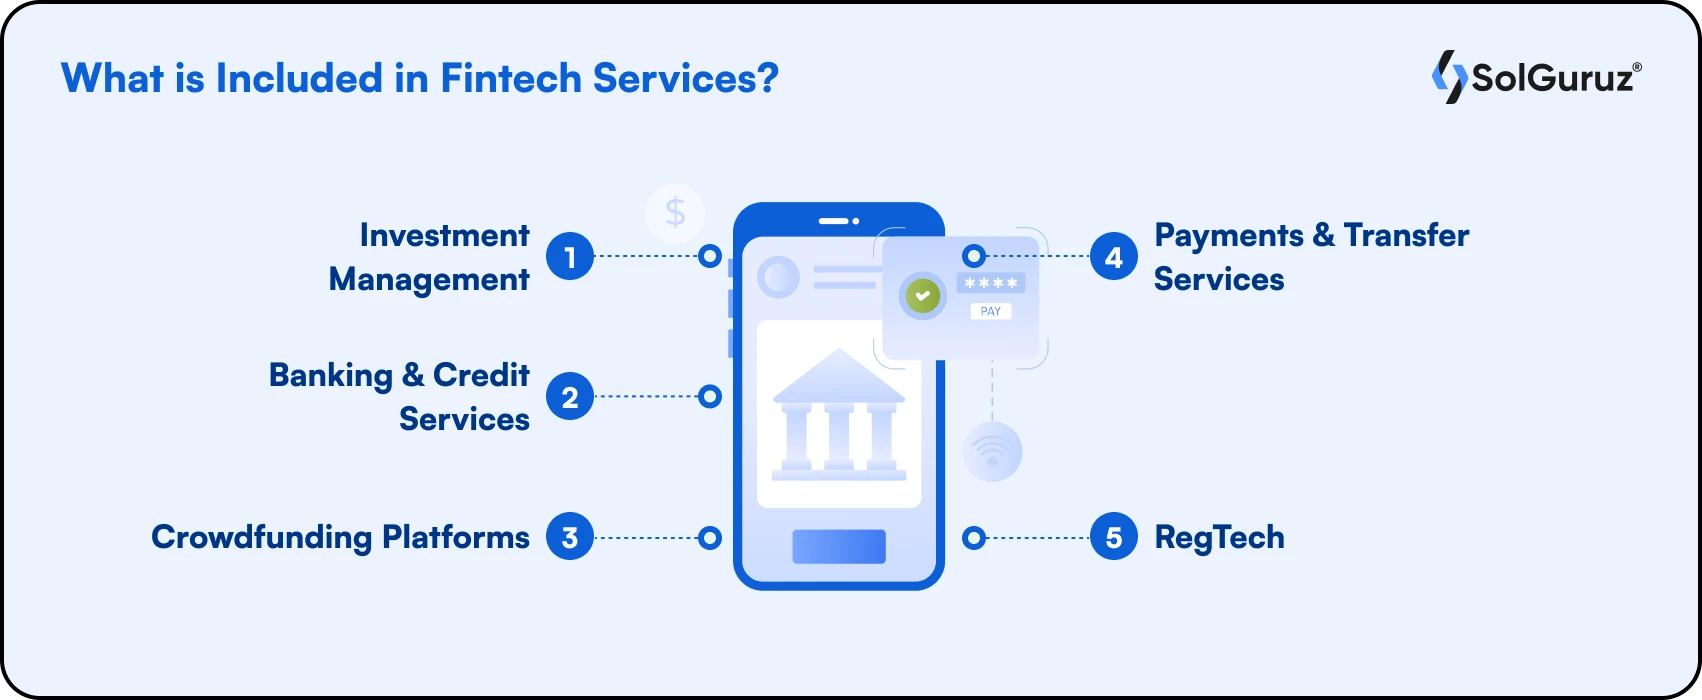 What is Fintech? What is Included in Fintech Services?